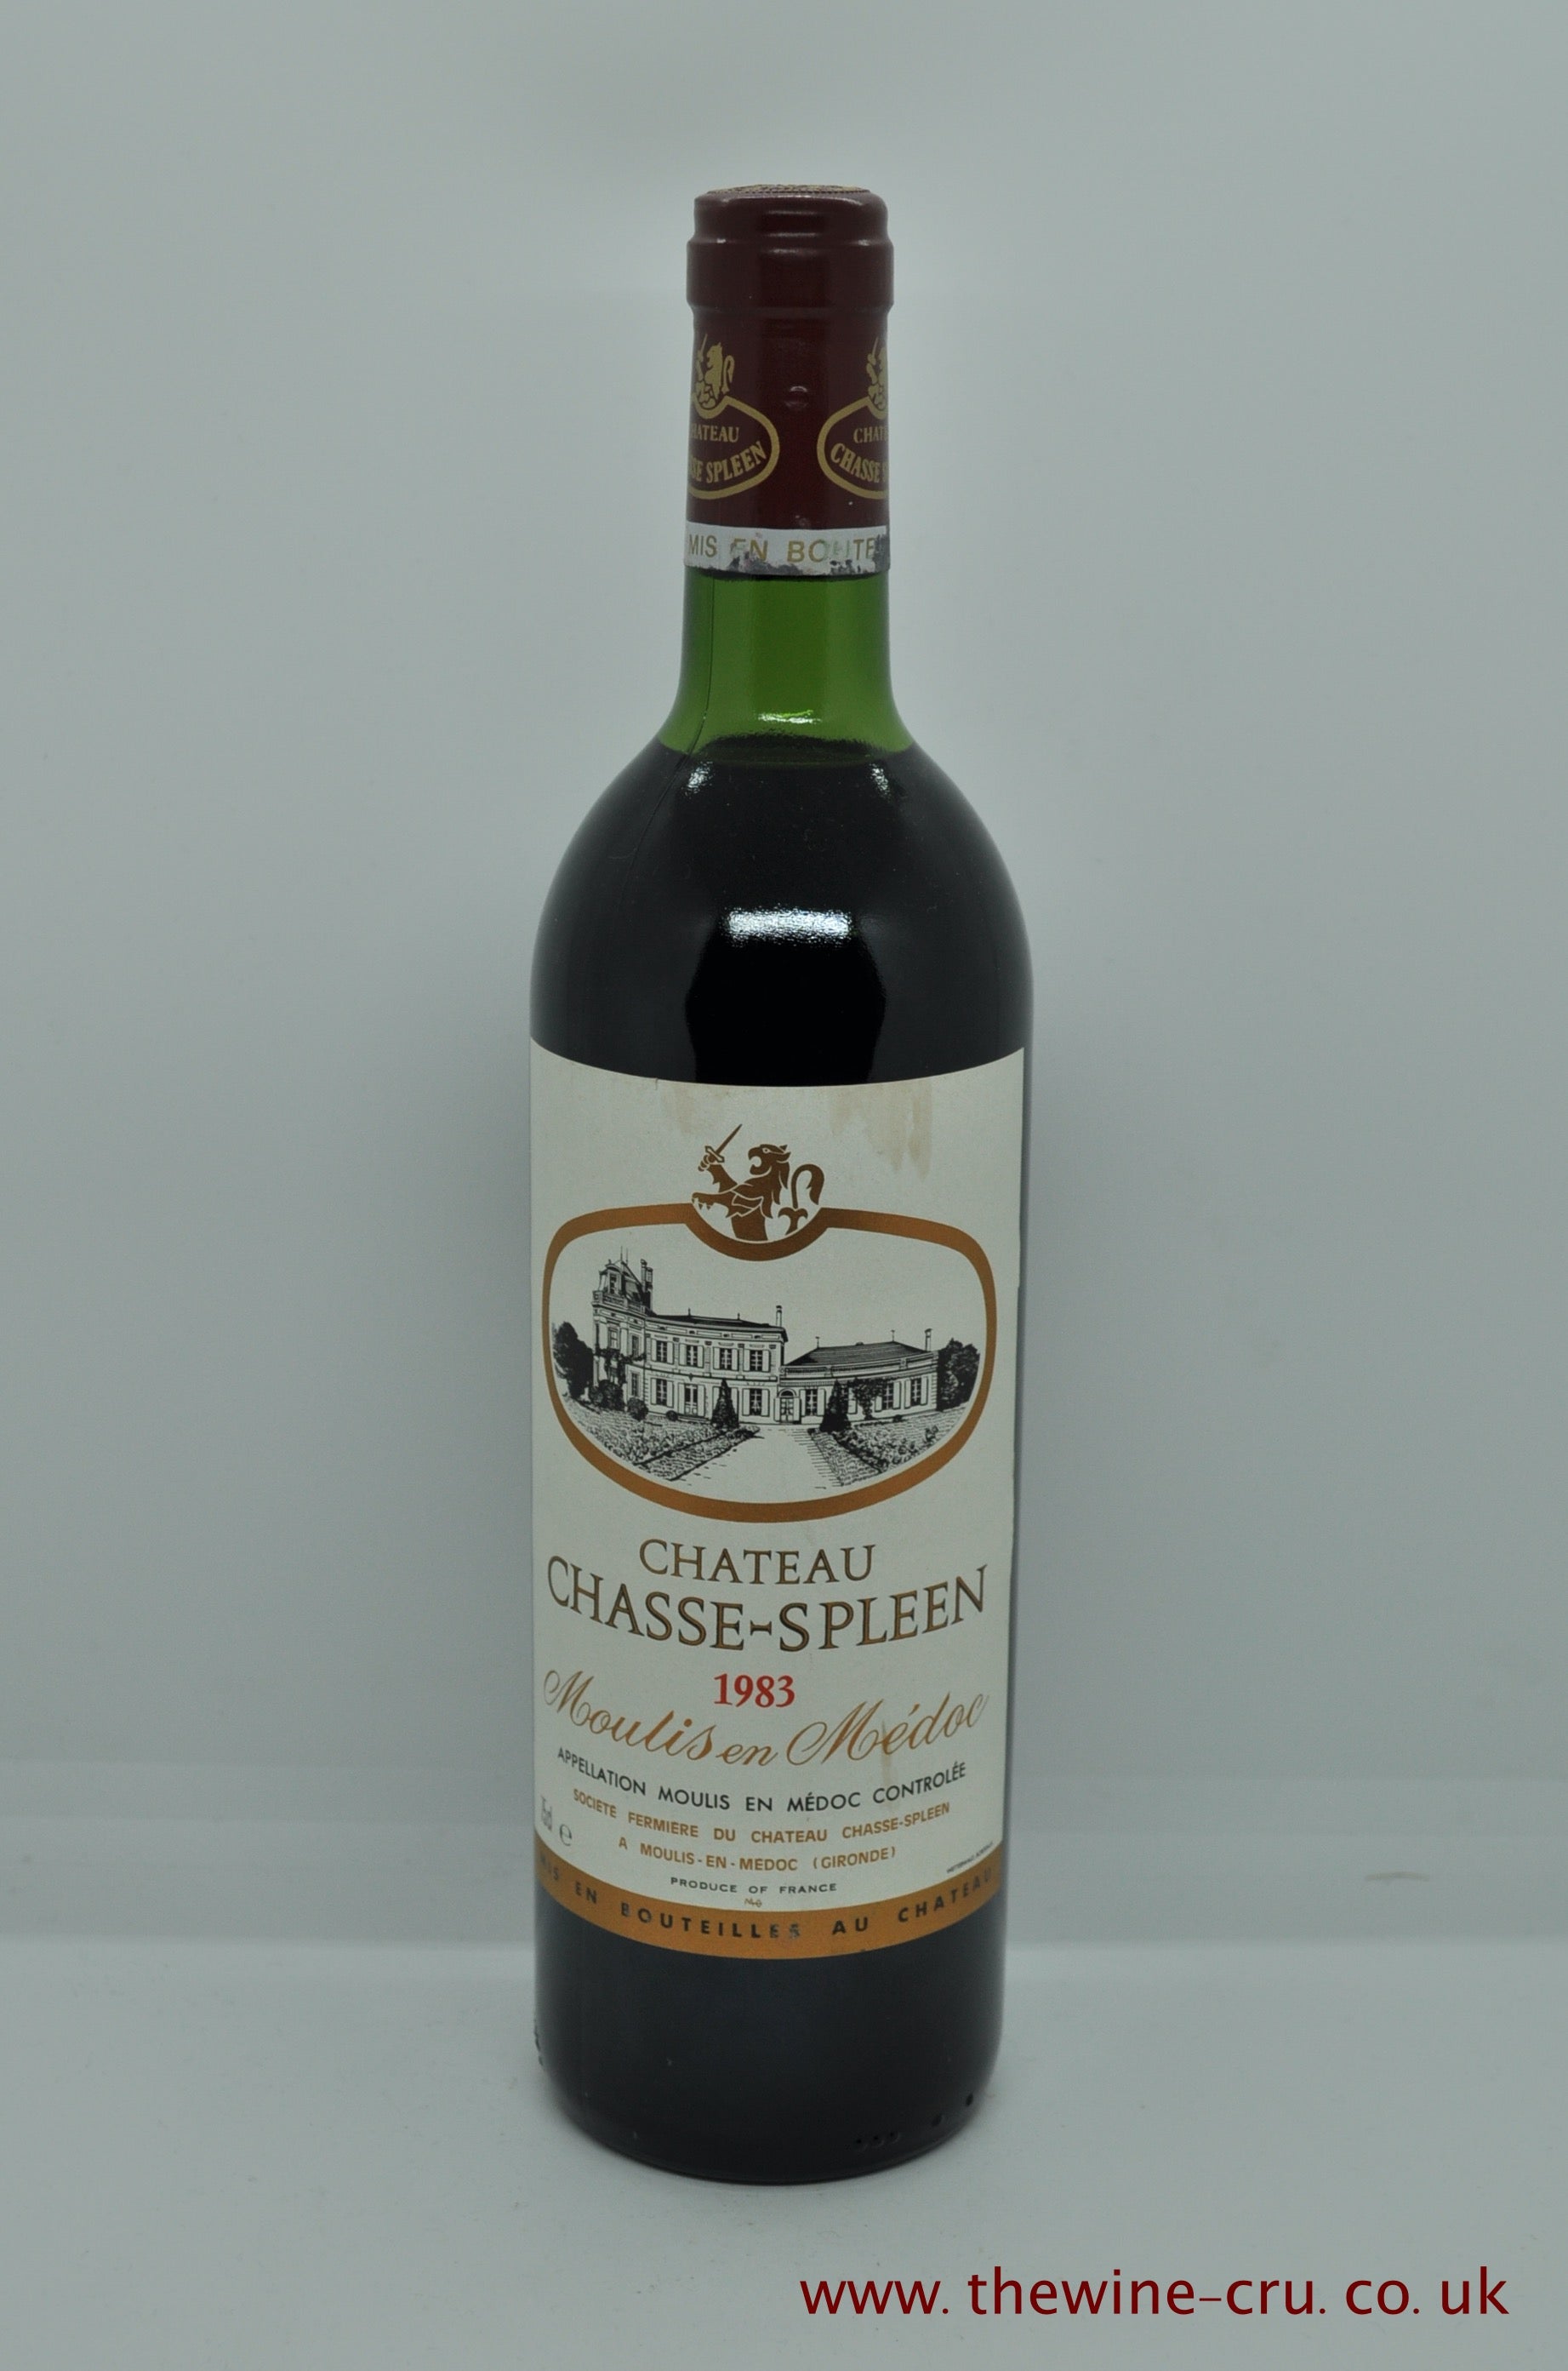 Chateau Chasse Spleen 1983 vintage red wine. France, Bordeaux. The bottle is in good condition with the level top shoulder. Immediate delivery. Free local deliver. Gift wrapping available.